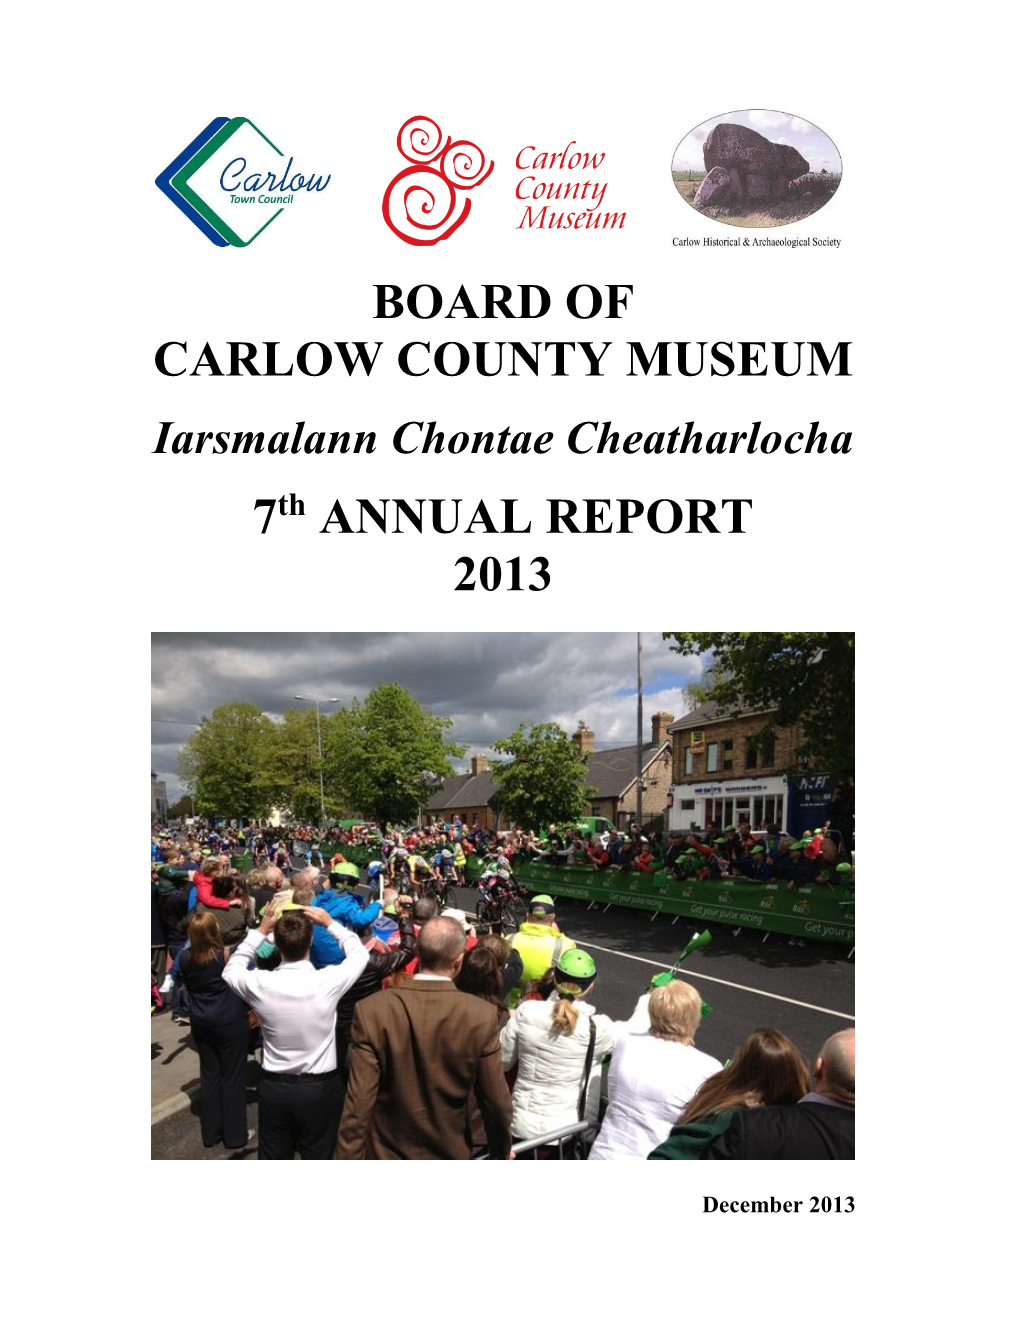 Board of Carlow County Museum 7